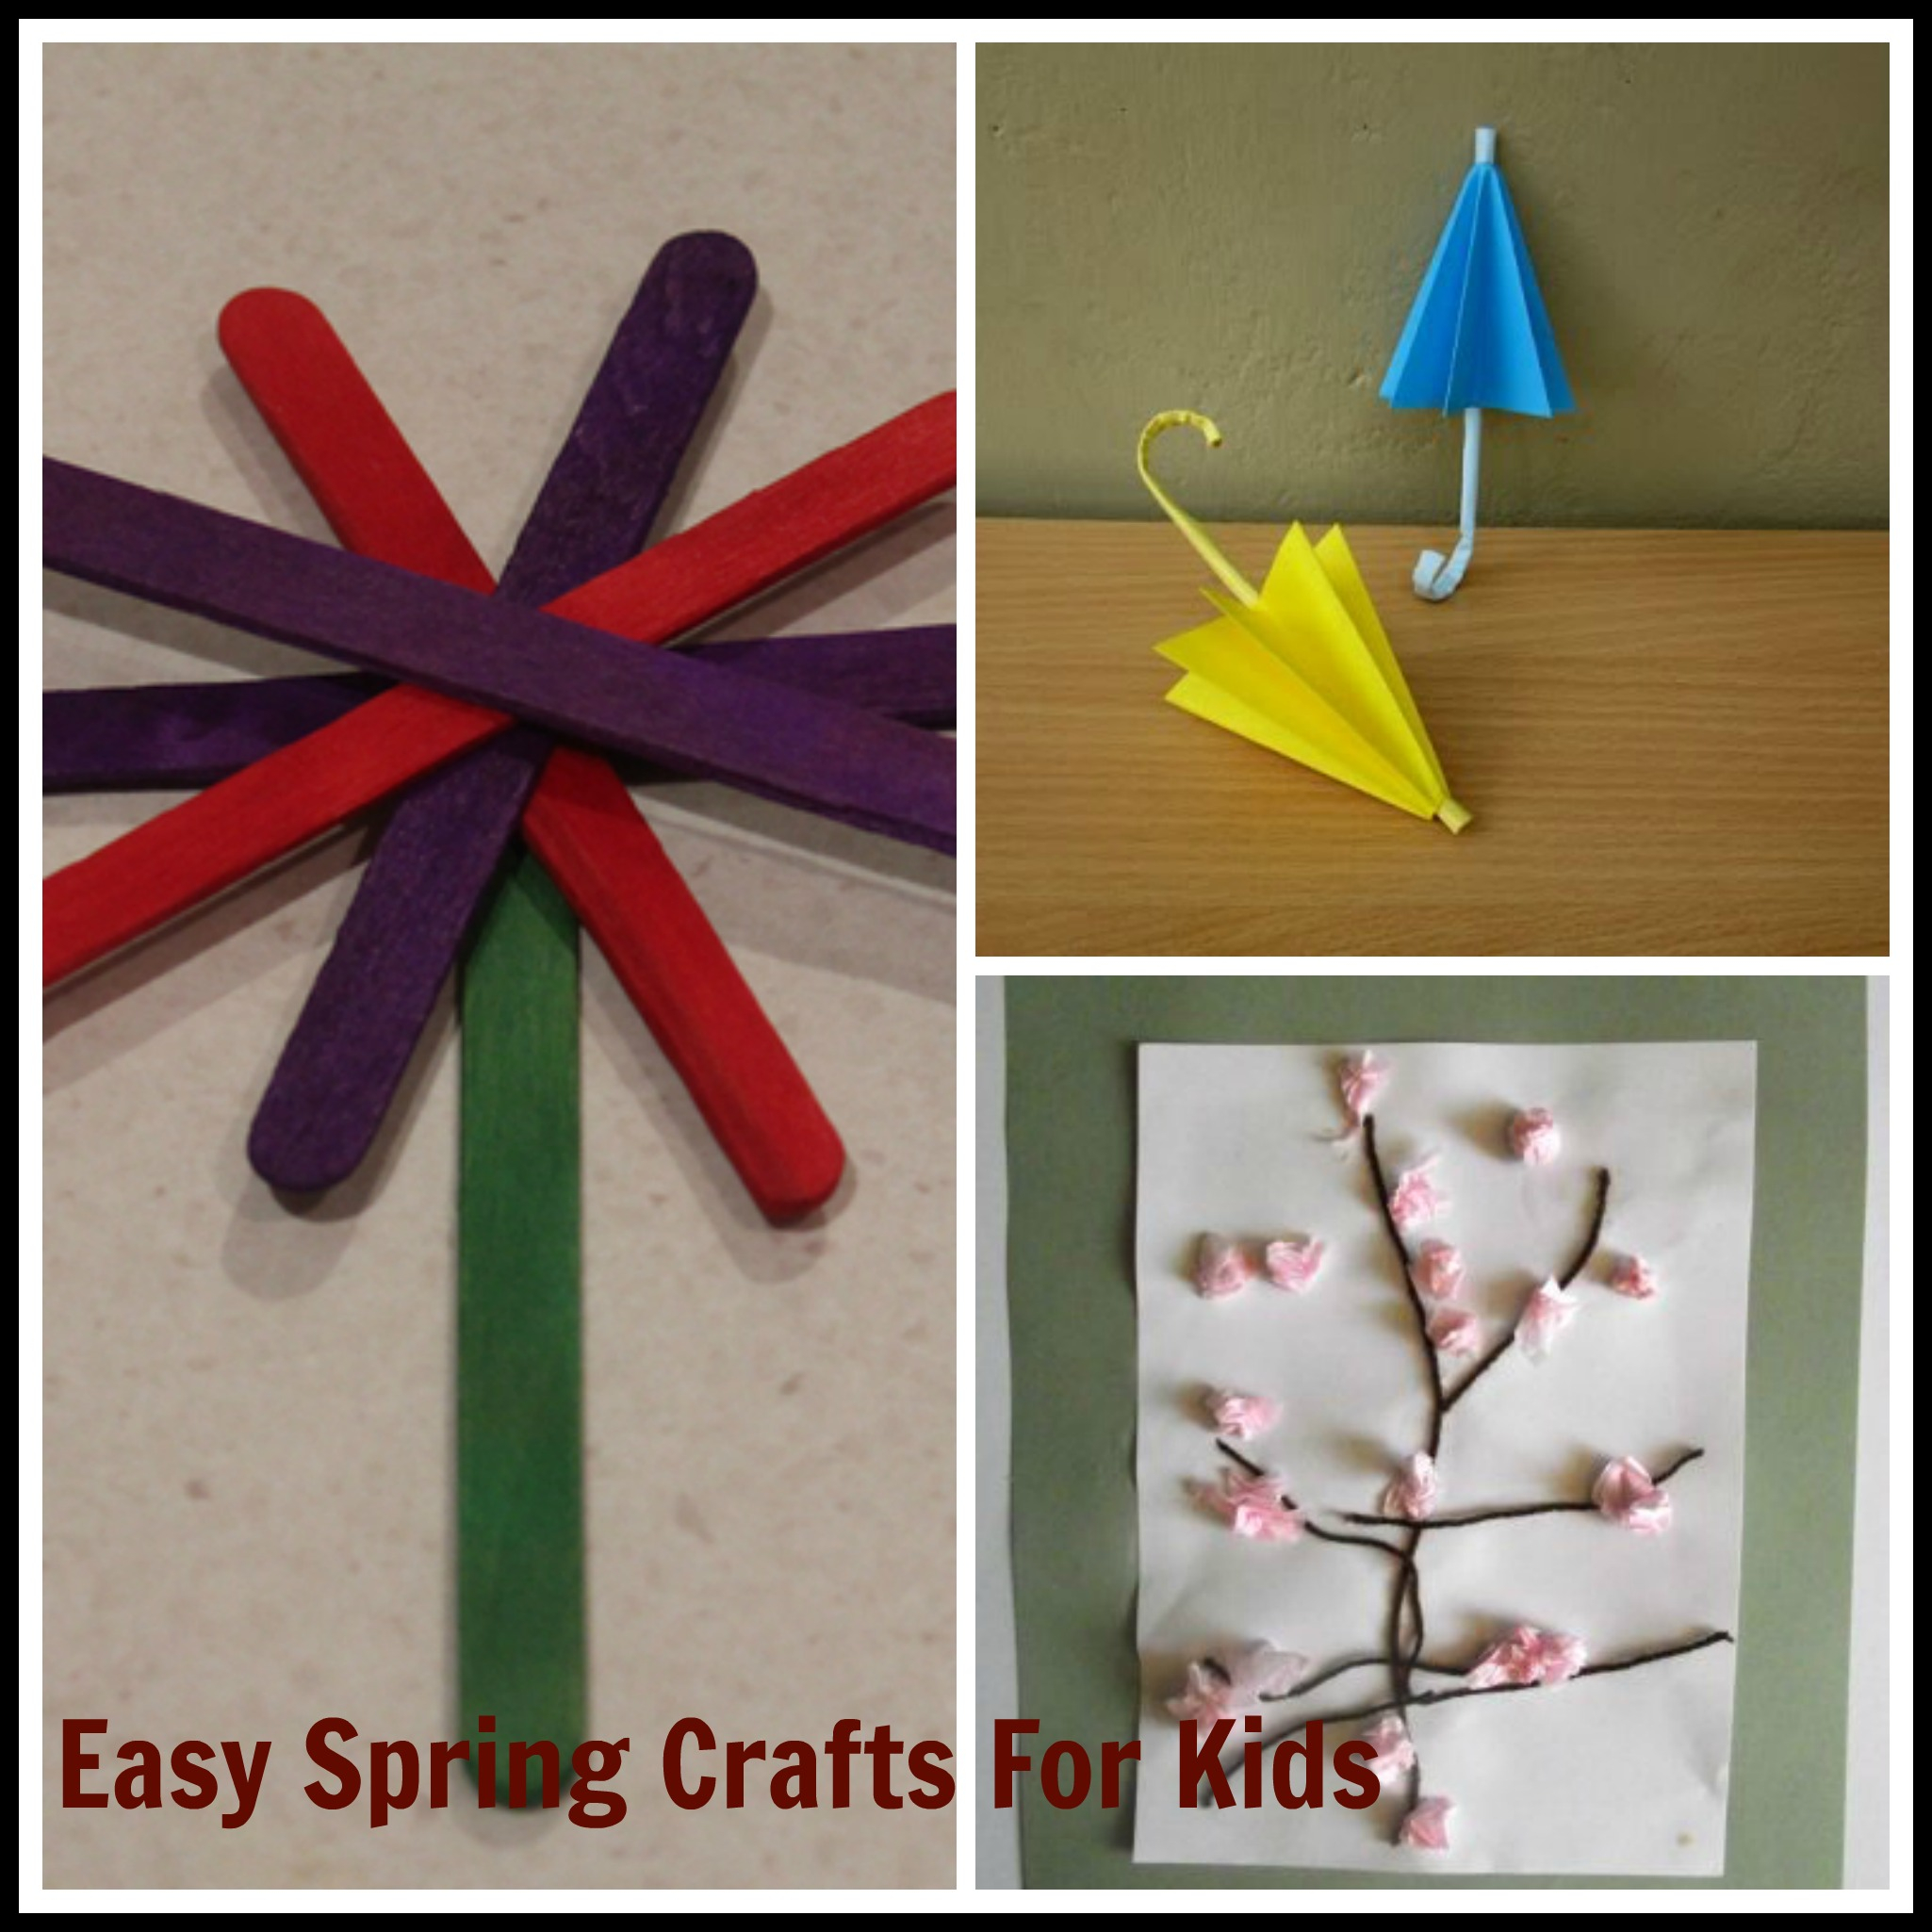 35+ Marvelous Image of Easy Crafts To Do With Construction Paper